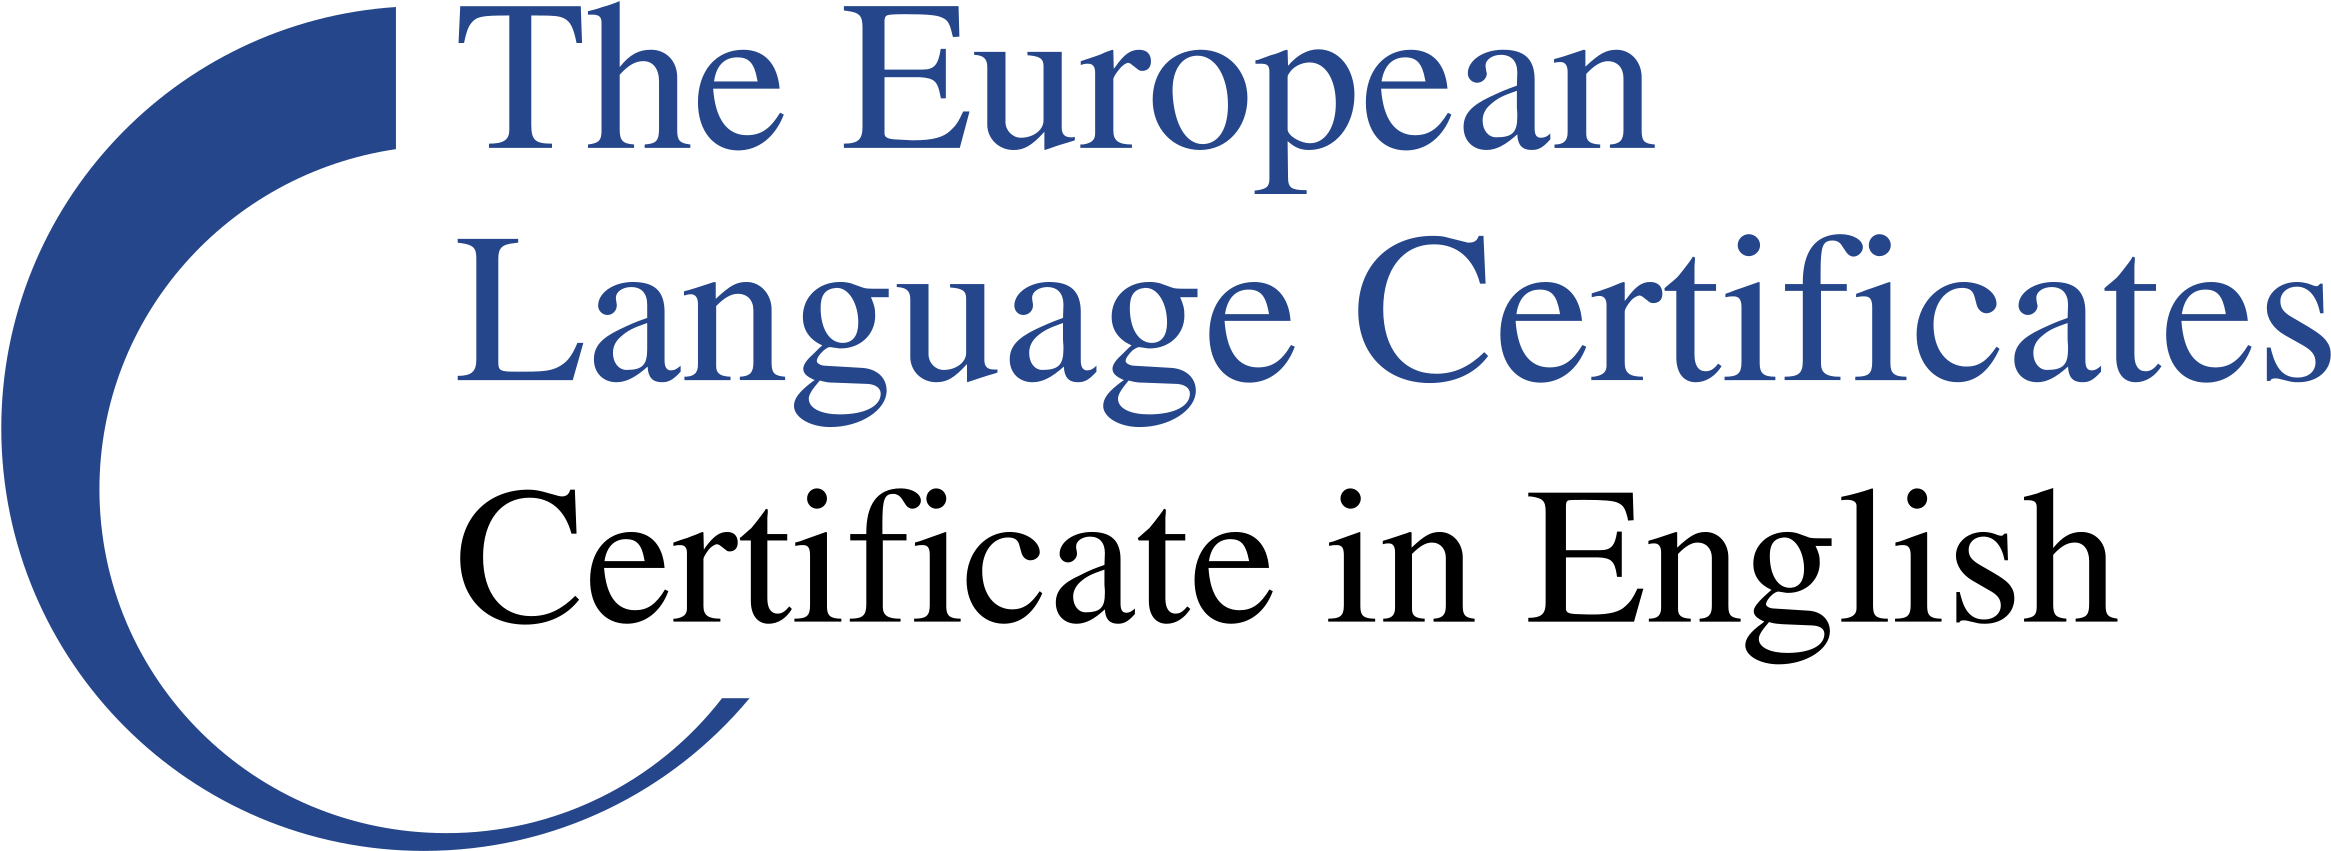 The European Language Certificates Logo Png Transparent - A+ Certification Training Guide (training Guides) (2400x2400), Png Download